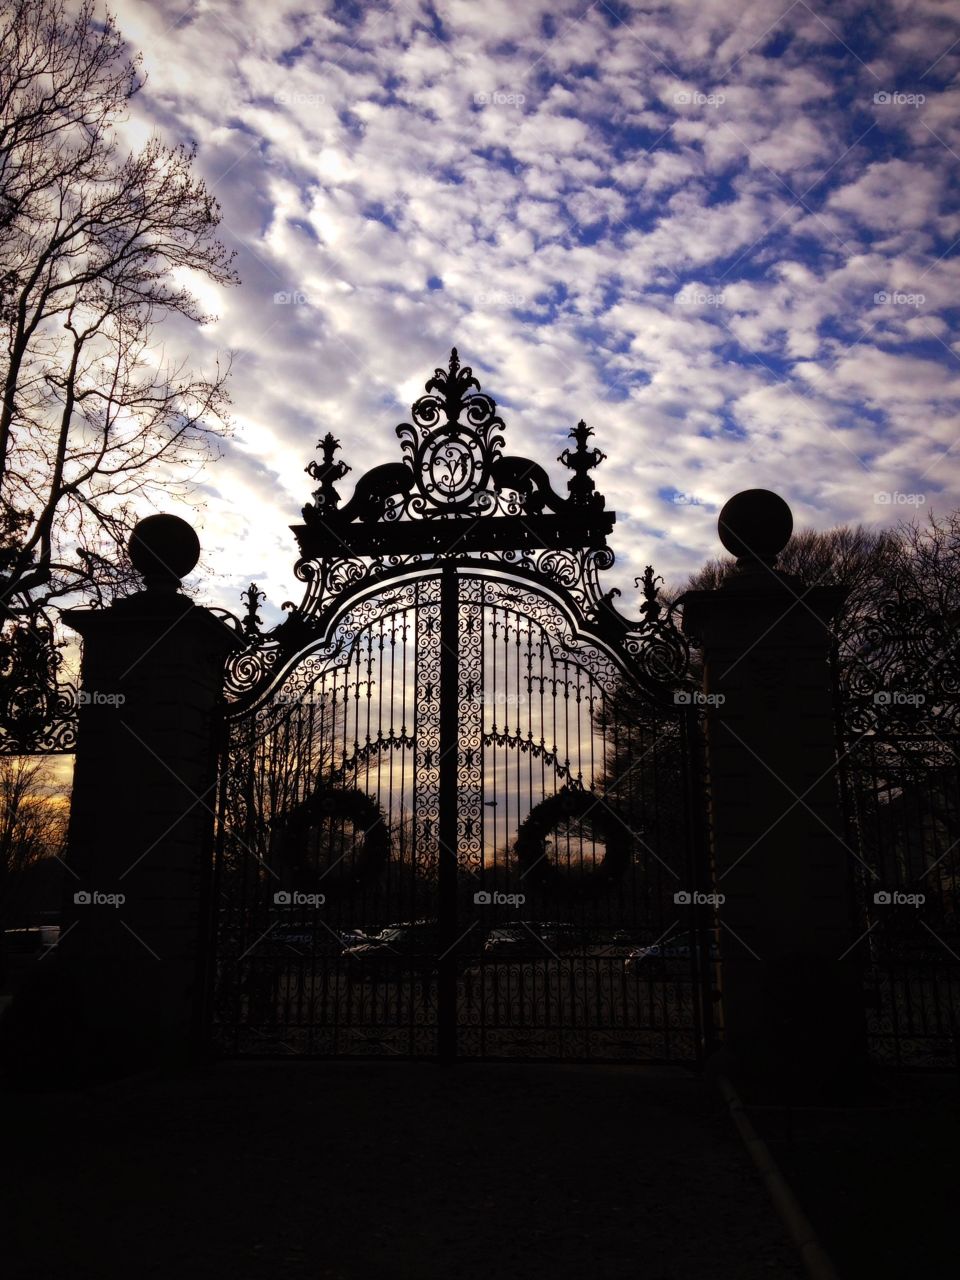 Looking through the gates...